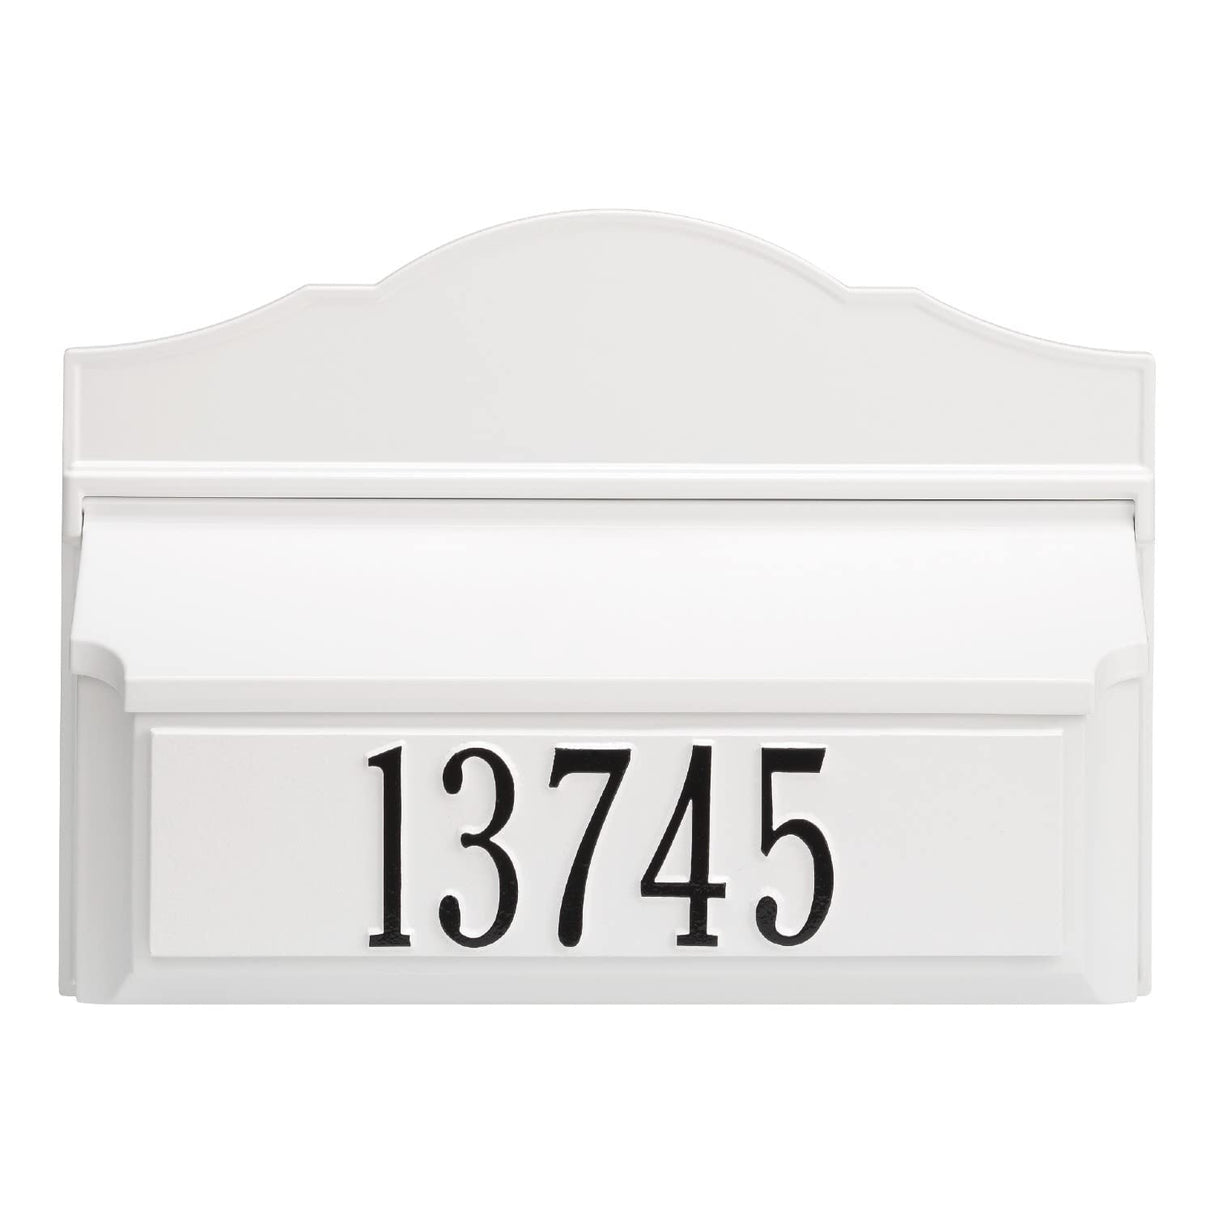 Whitehall 11257 - Colonial Wall Mailbox Package #2 (Mailbox & Plaque)